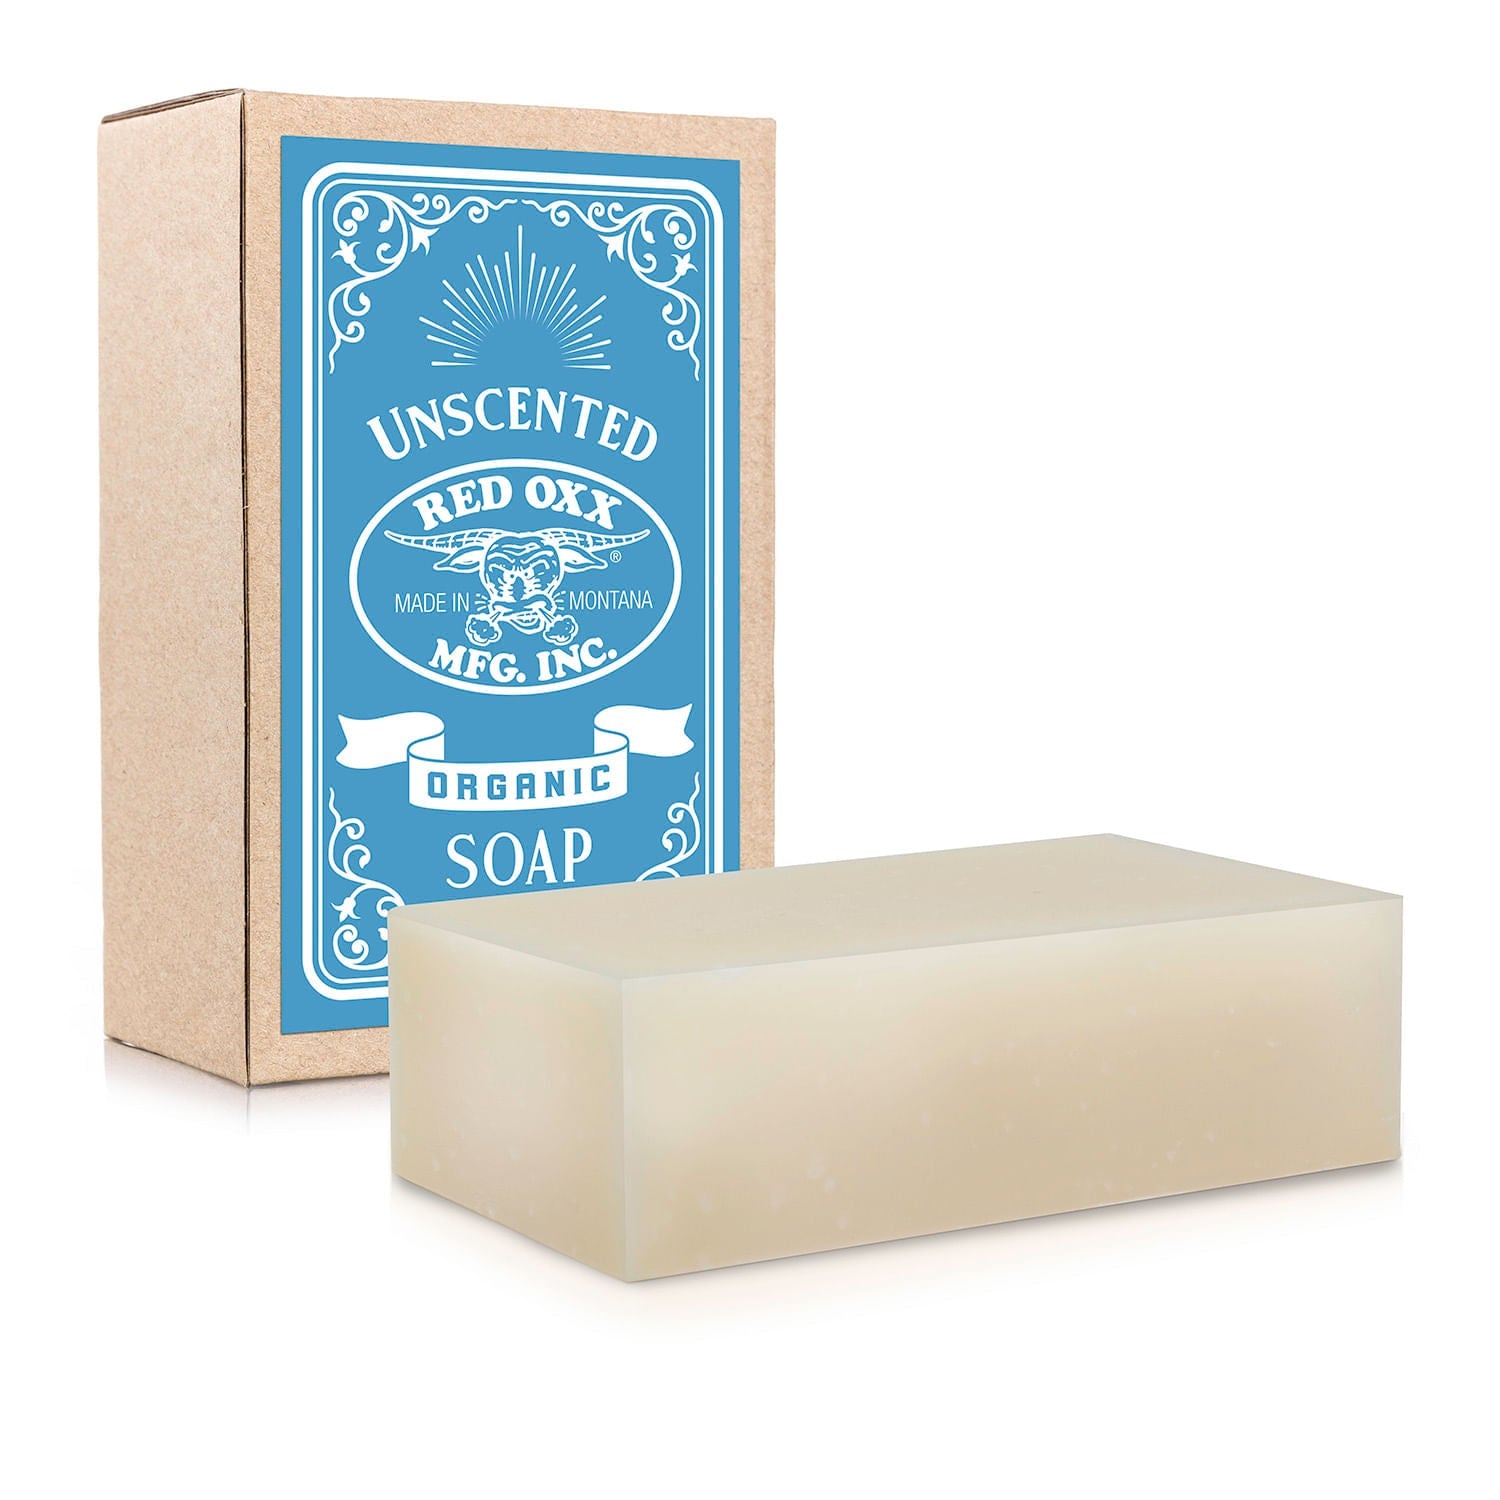 Unscented soap